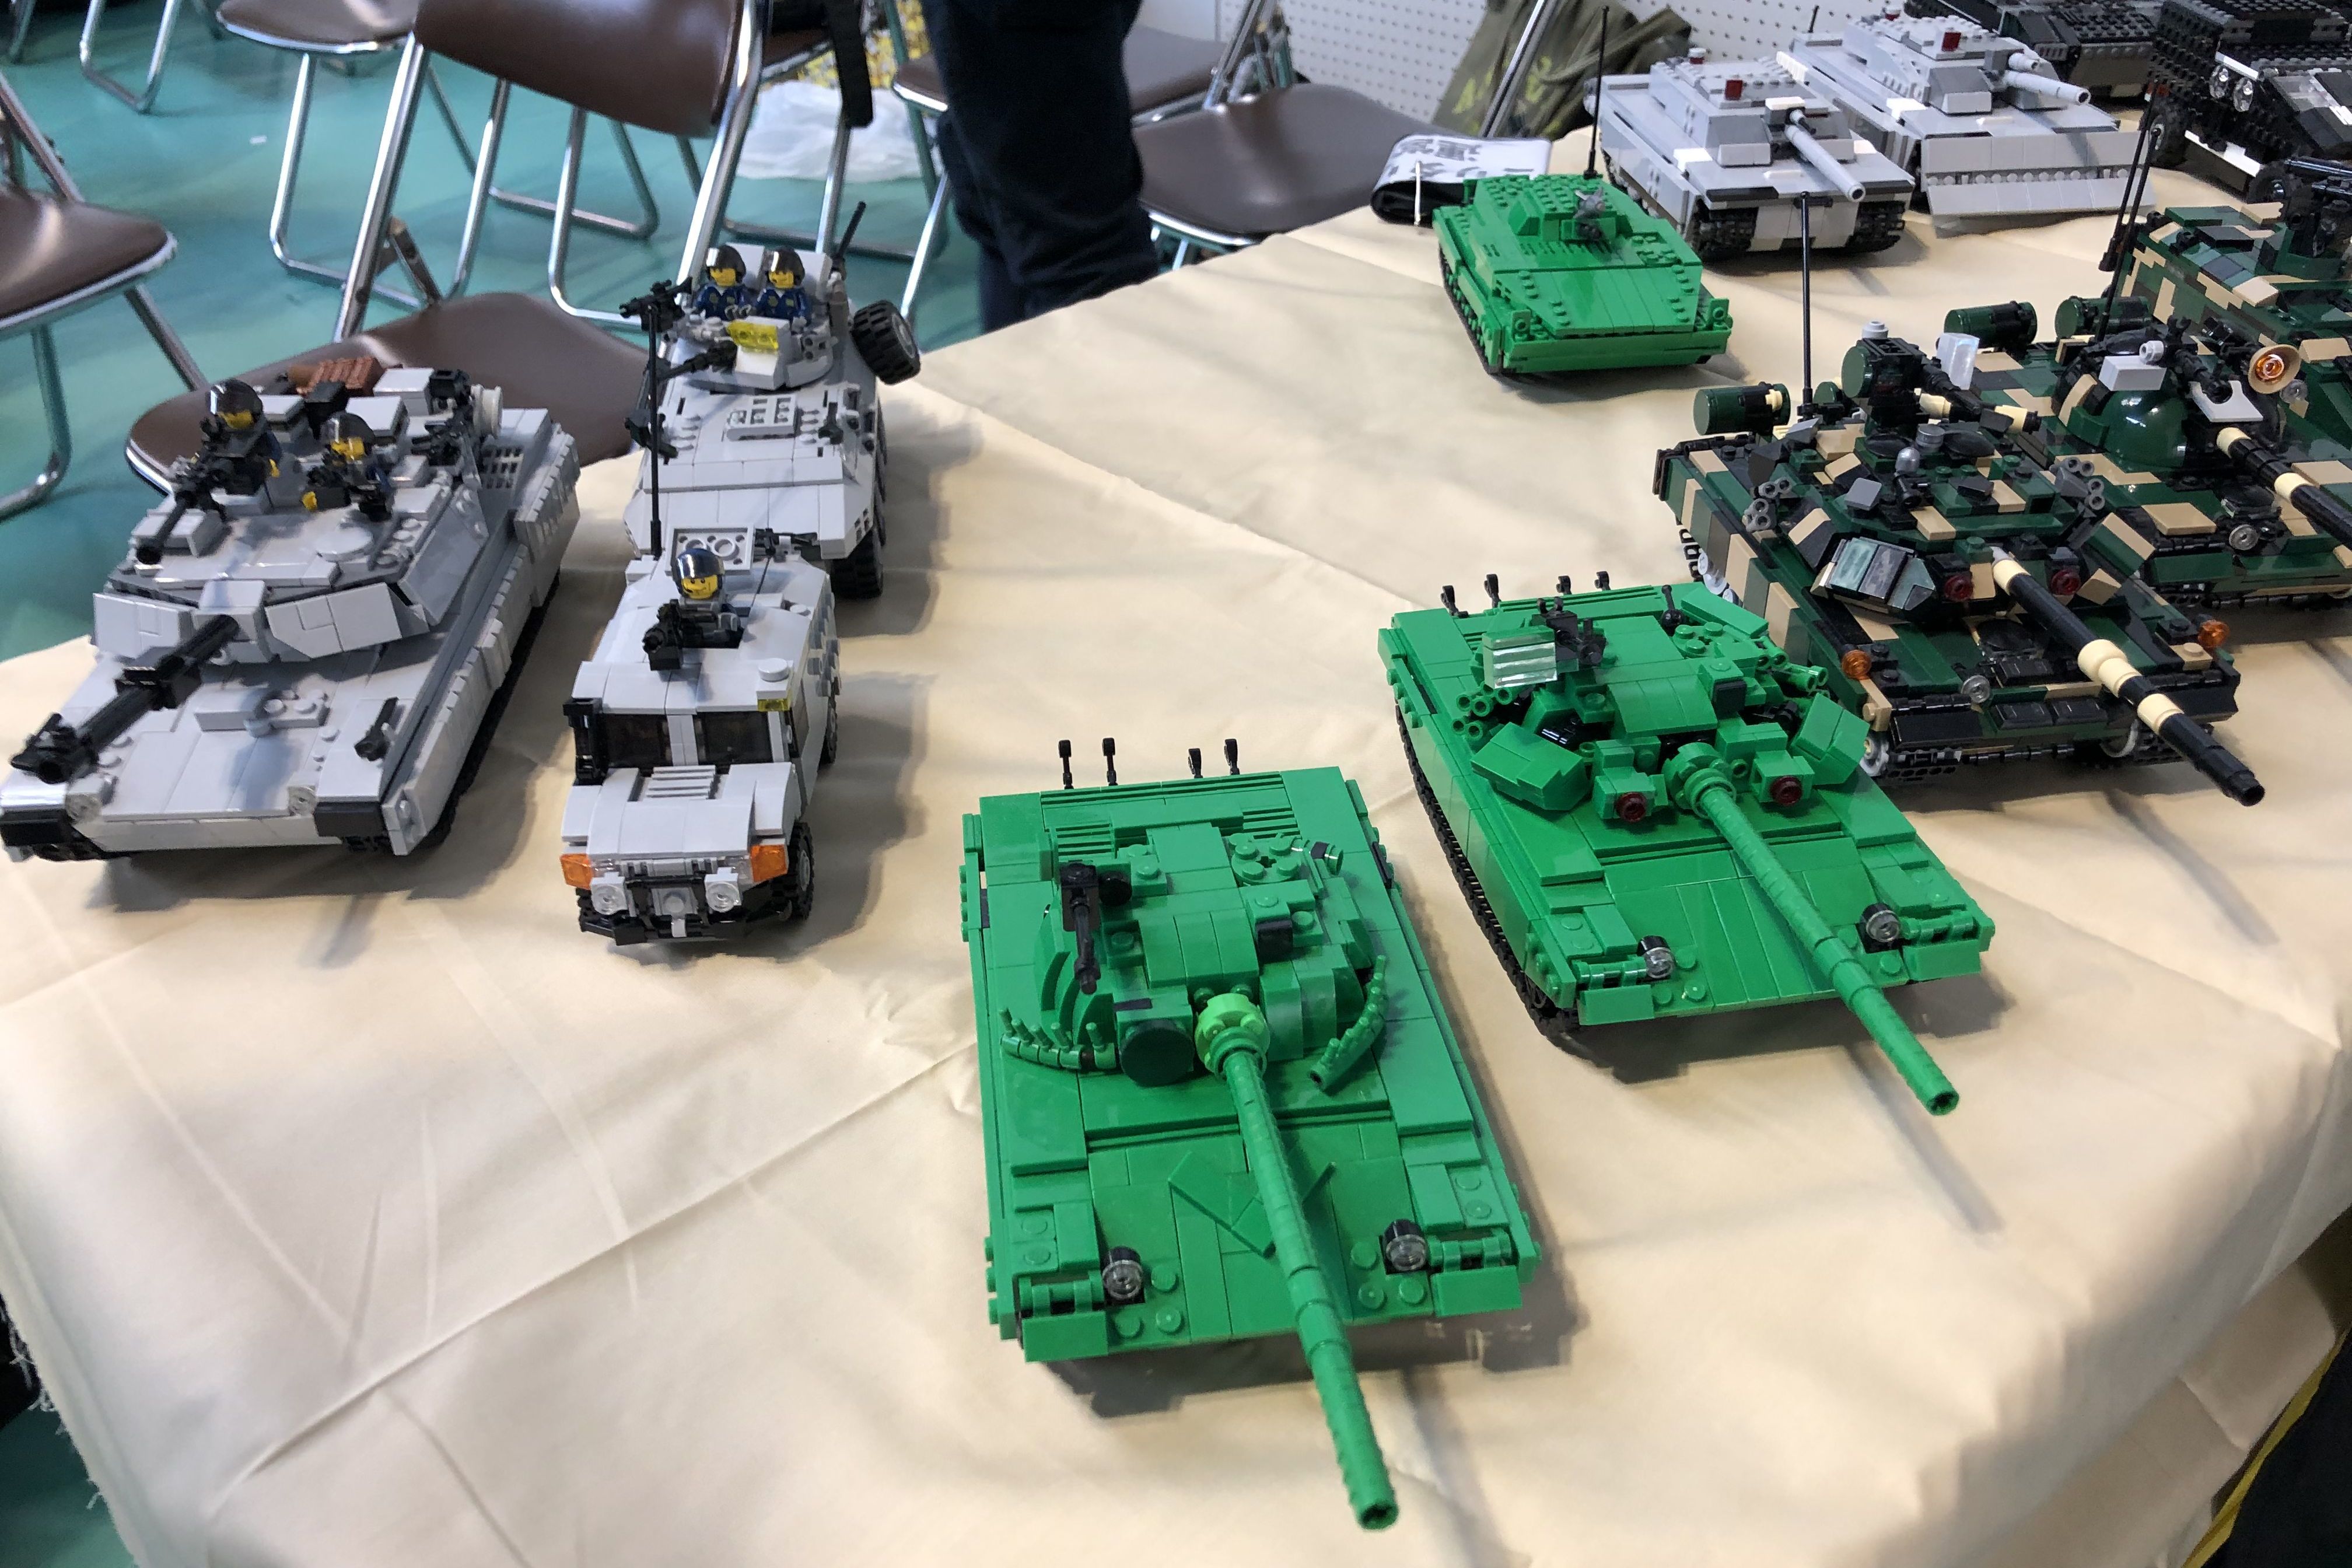 LEGO won't modern war machines, but others are picking up the pieces |